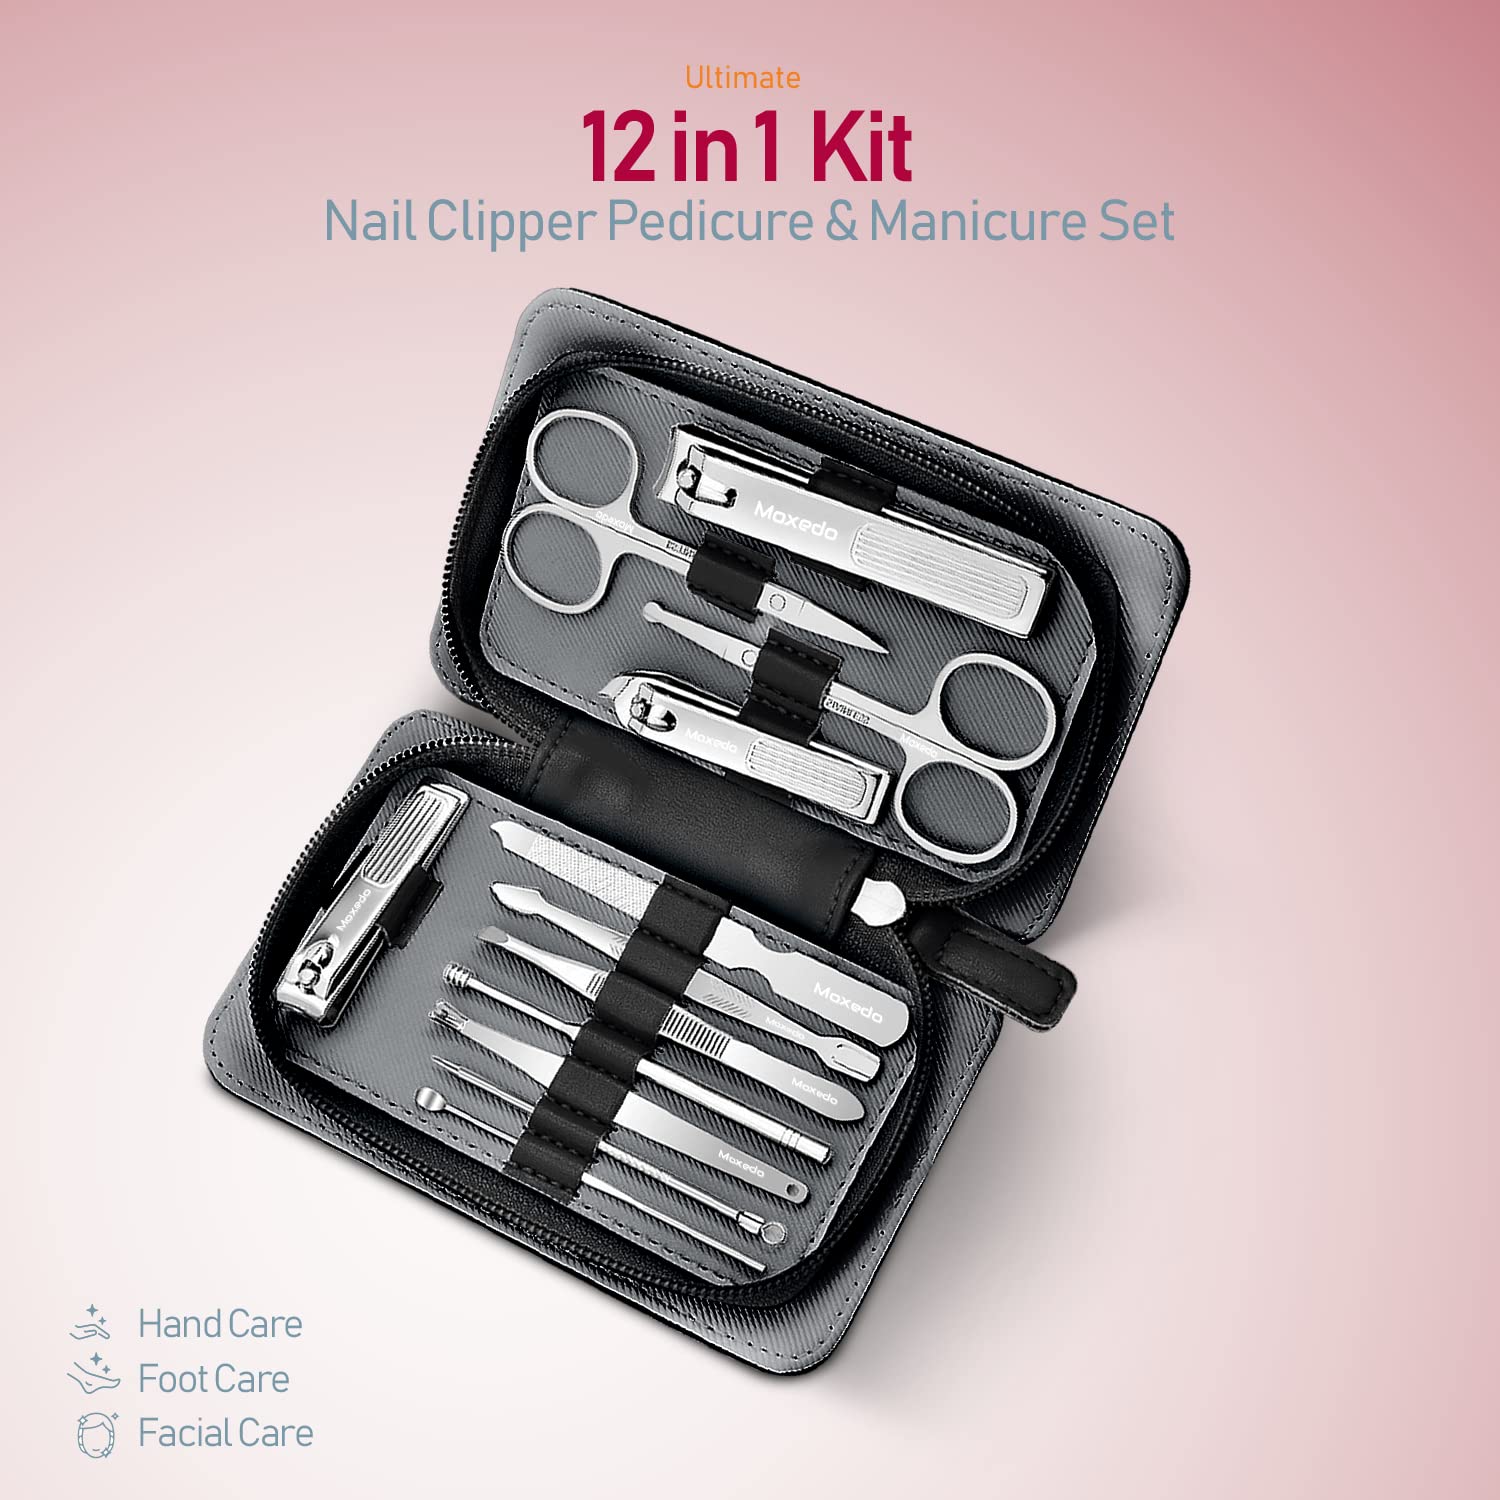 Moxedo 12 in 1 Kit Stainless Steel Professional Nail Clipper Manicure and Pedicure with Leather Travel Case